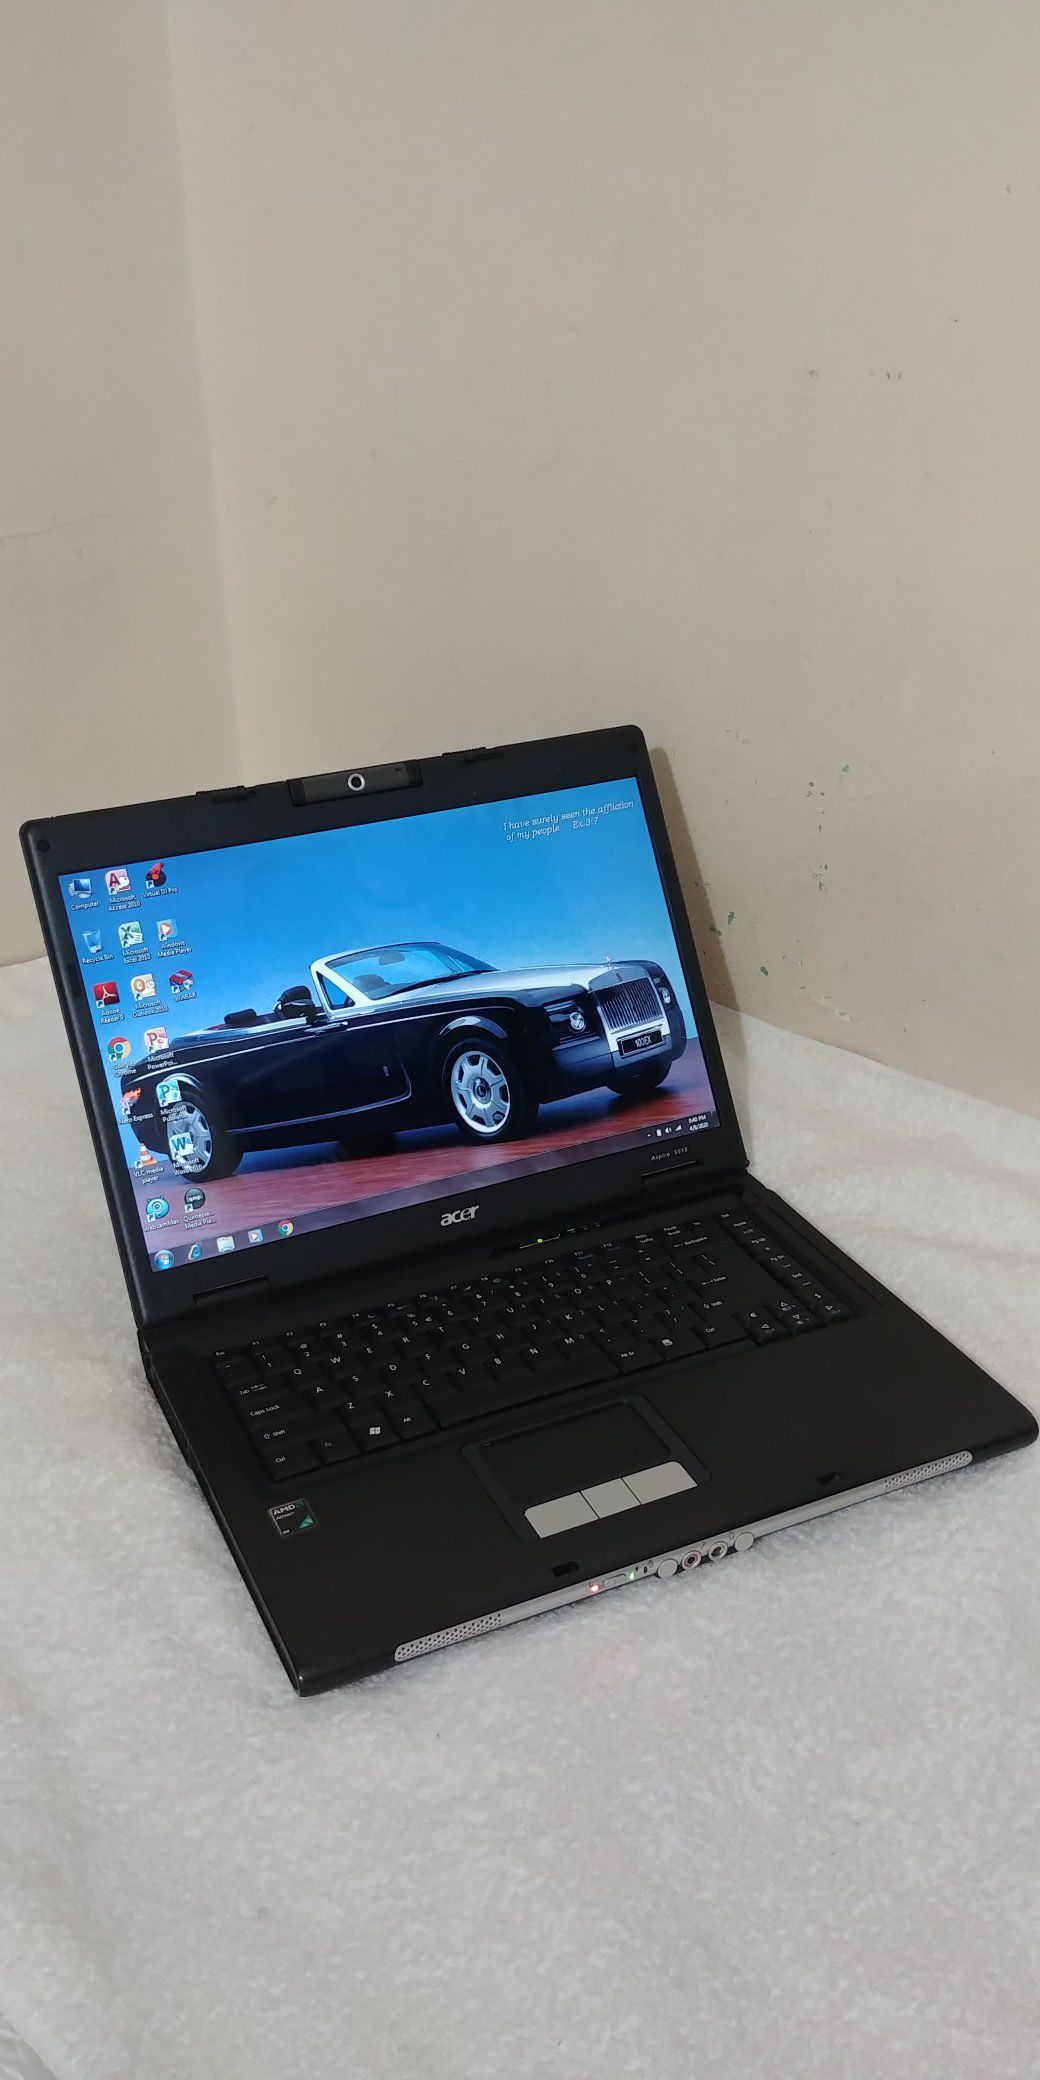 15" Acer Laptop, 160GB HDD, 3GB RAM, DVD RW And a Webcam. All The Necessary Programs Has Been Installed.